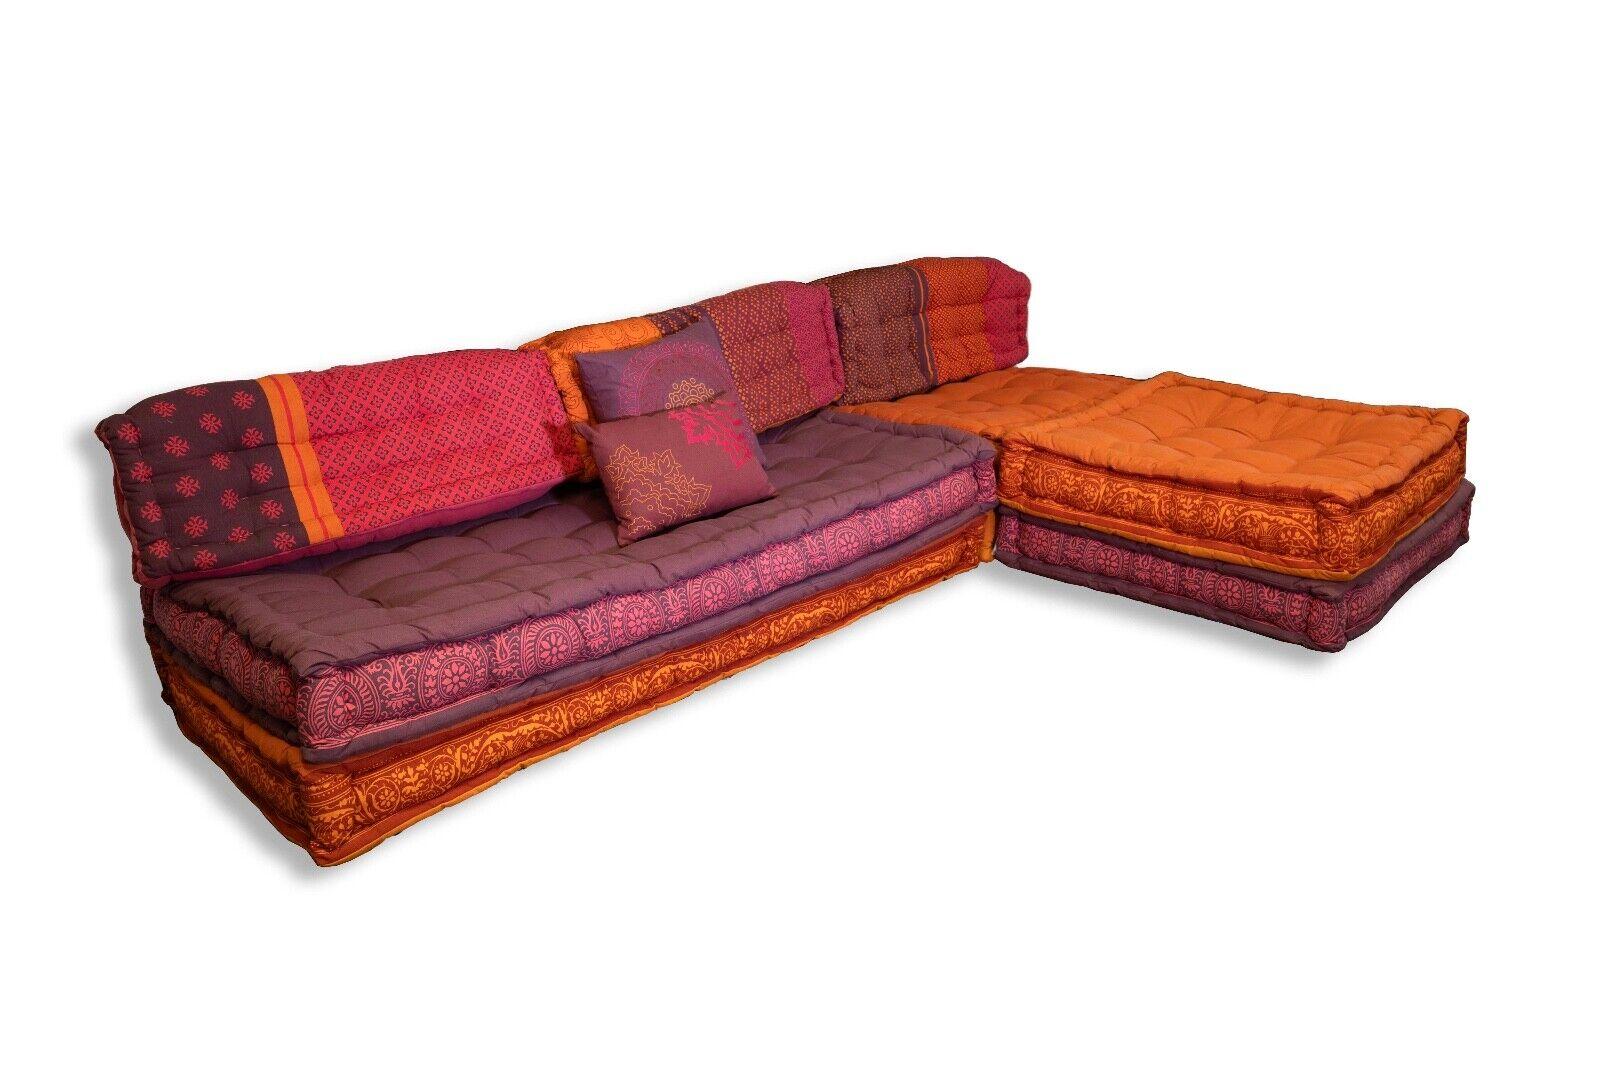 The Modern Purple & Orange Sofa Sectional draws inspiration from the iconic Roche Bobois Mah Jong Modular Style, offering a fresh and contemporary twist on a classic design. This stunning sectional sofa combines vibrant purple and orange hues,